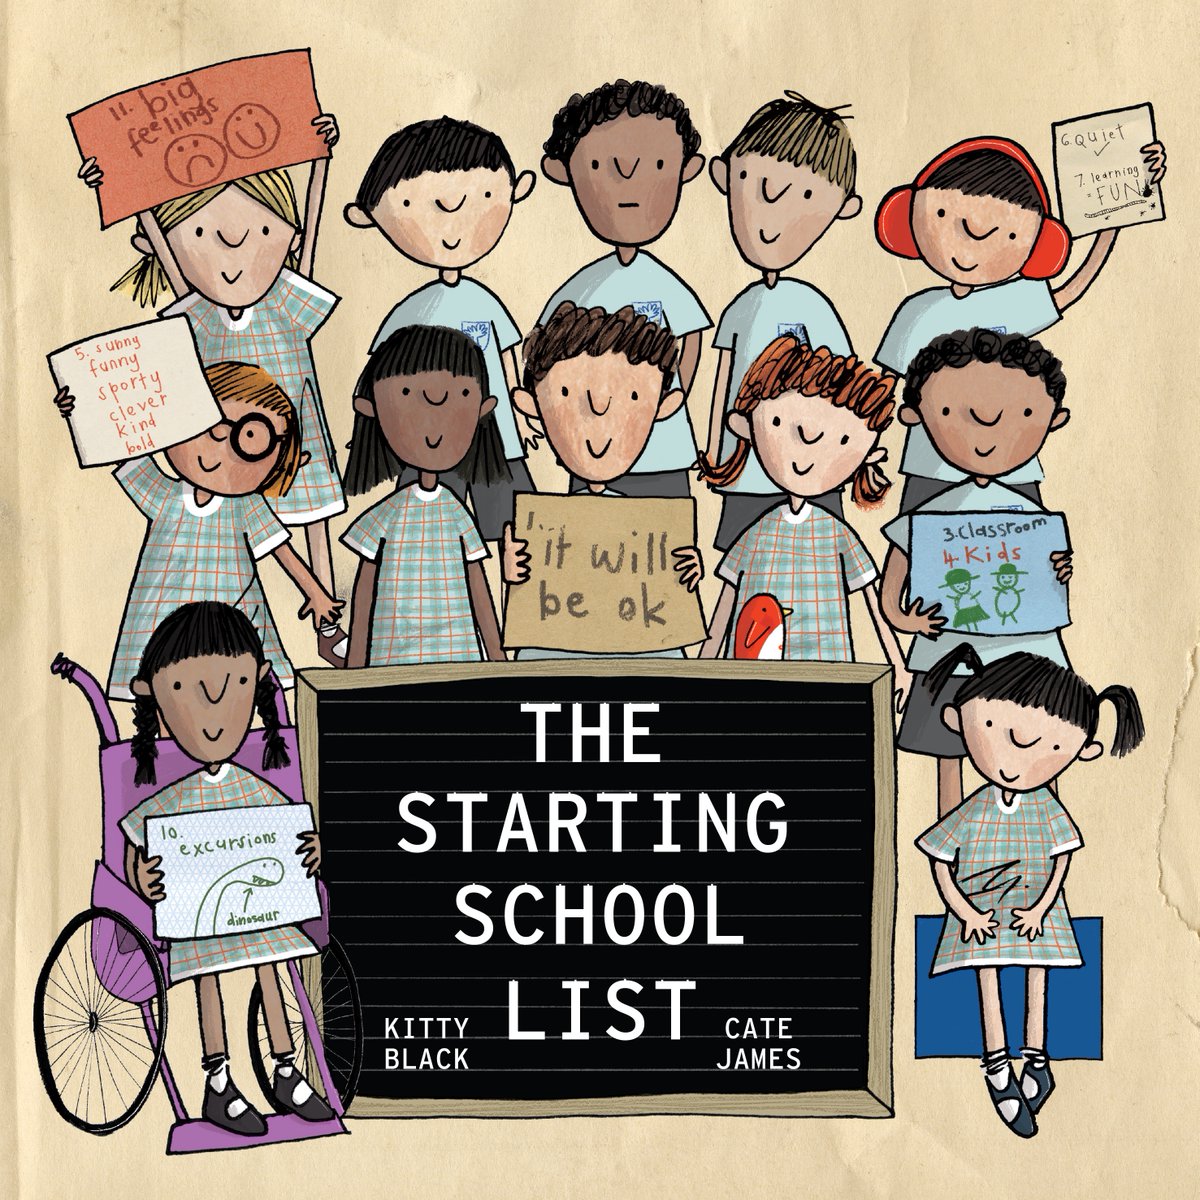 Get preps prepped for day 1 of school with #TheStartingSchoolList Gentle, comforting and reassuring; an excellent resource for supporting little ones as they set out on one of life’s biggest and best adventures @AffirmPress @KittyBlackBooks @catetheartist awordaboutbooks.com/blog/the-start…